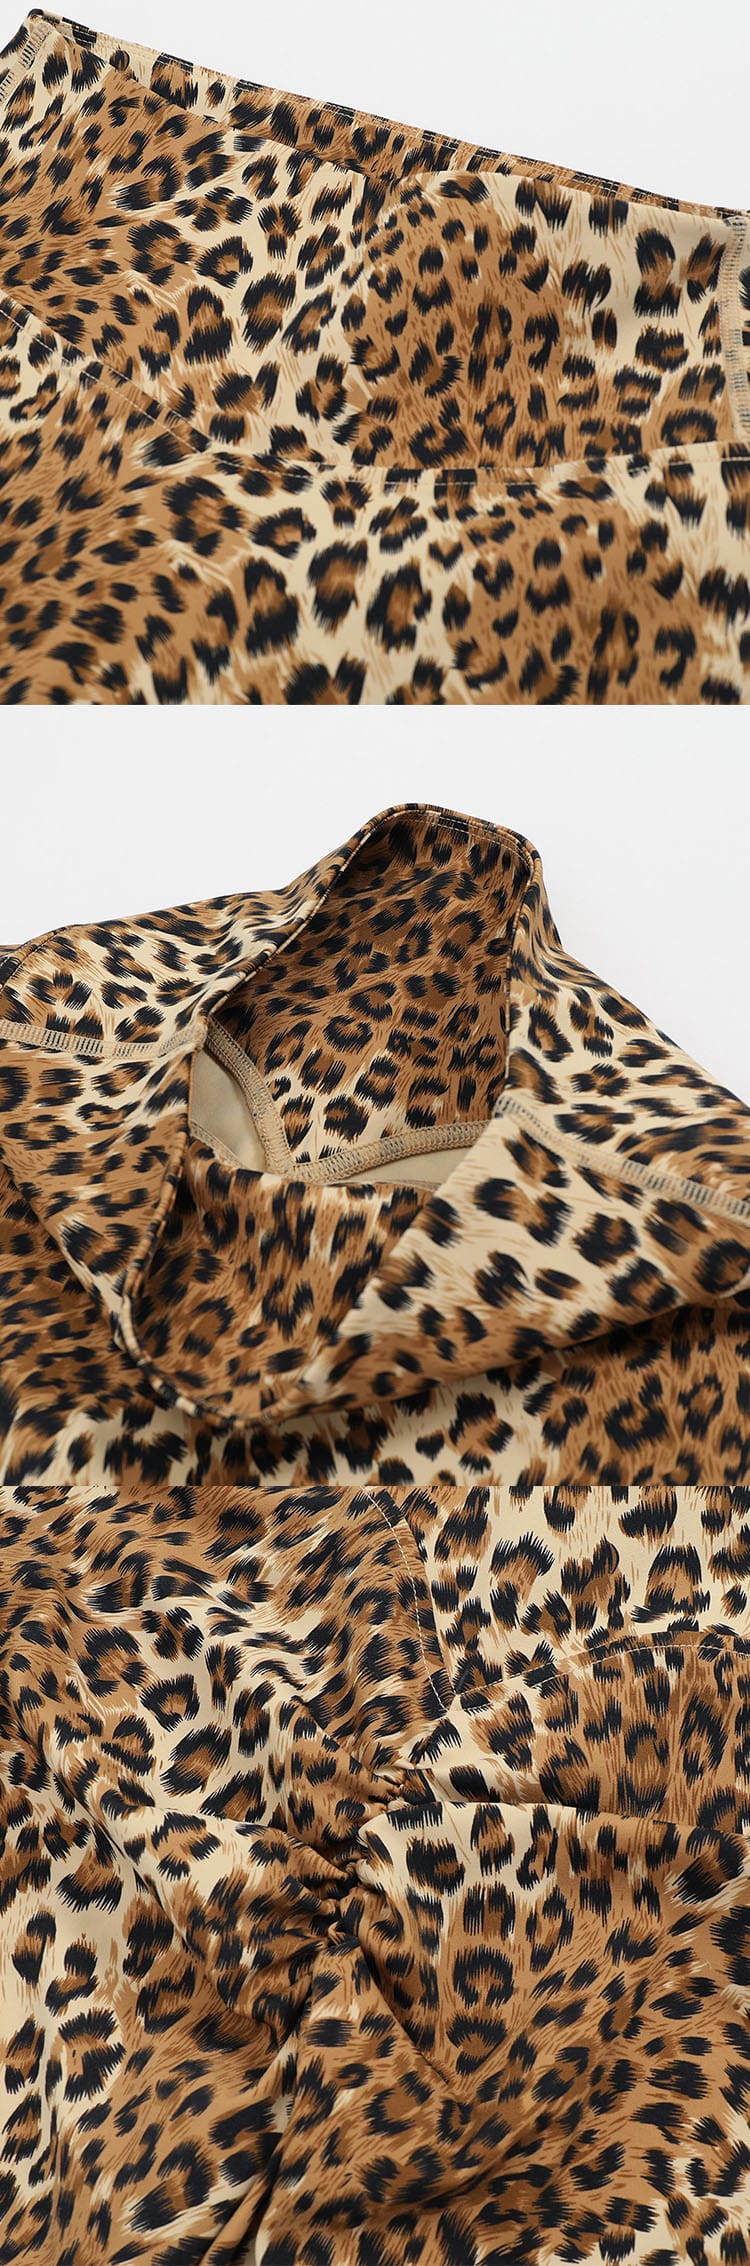 Fashion leopard print is adopted to show personality and release sports charm